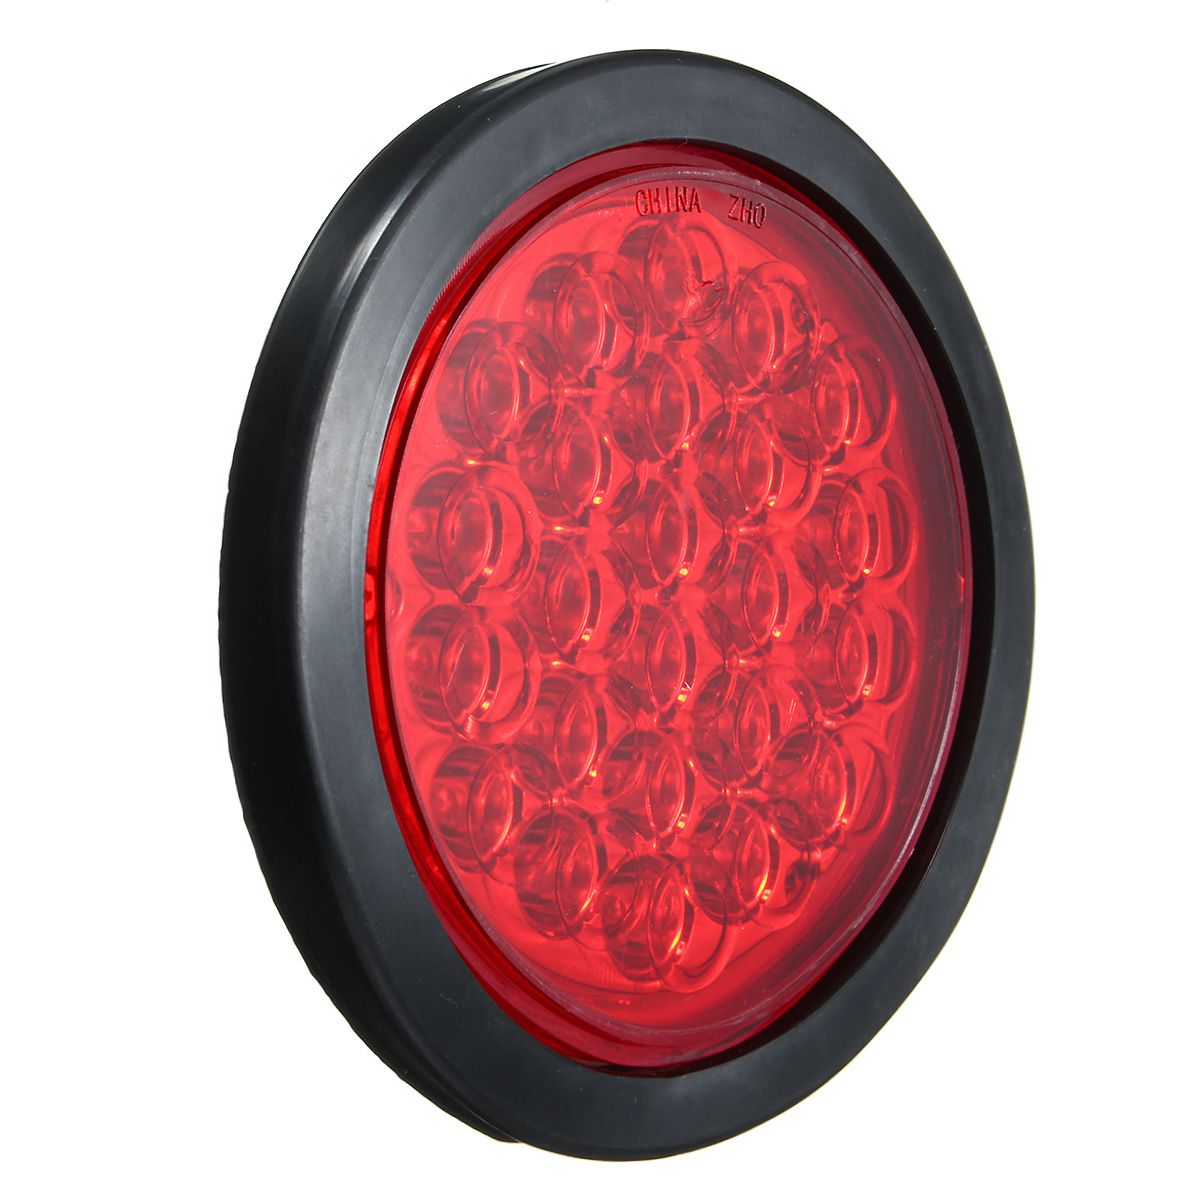 24-LED-Red-White-Yellow-Round-Rear-Tail-Stop-Light-Brake-Lamp-Reflector-for-Truck-Trailer-Bus-Boat-1119961